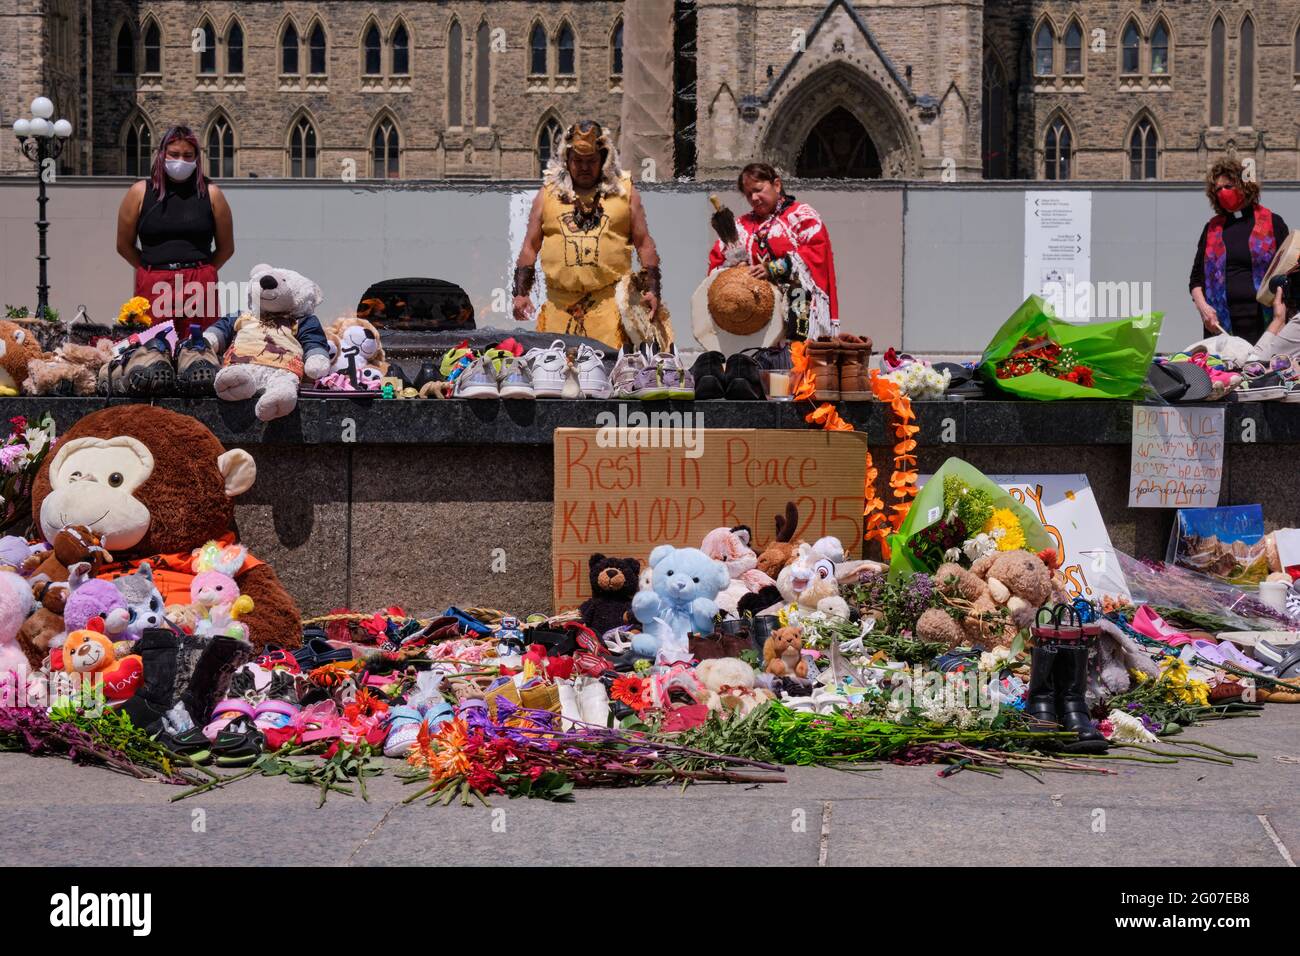 Ottawa, Canada. June 1st, 2021. Members of First Nations communities perform a ceremony in memory of the 215 children found buried at a former Kamloops, British Colombia residential school at a memorial in front of the Canadian Parliament. Credit: meanderingemu/Alamy Live News Stock Photo